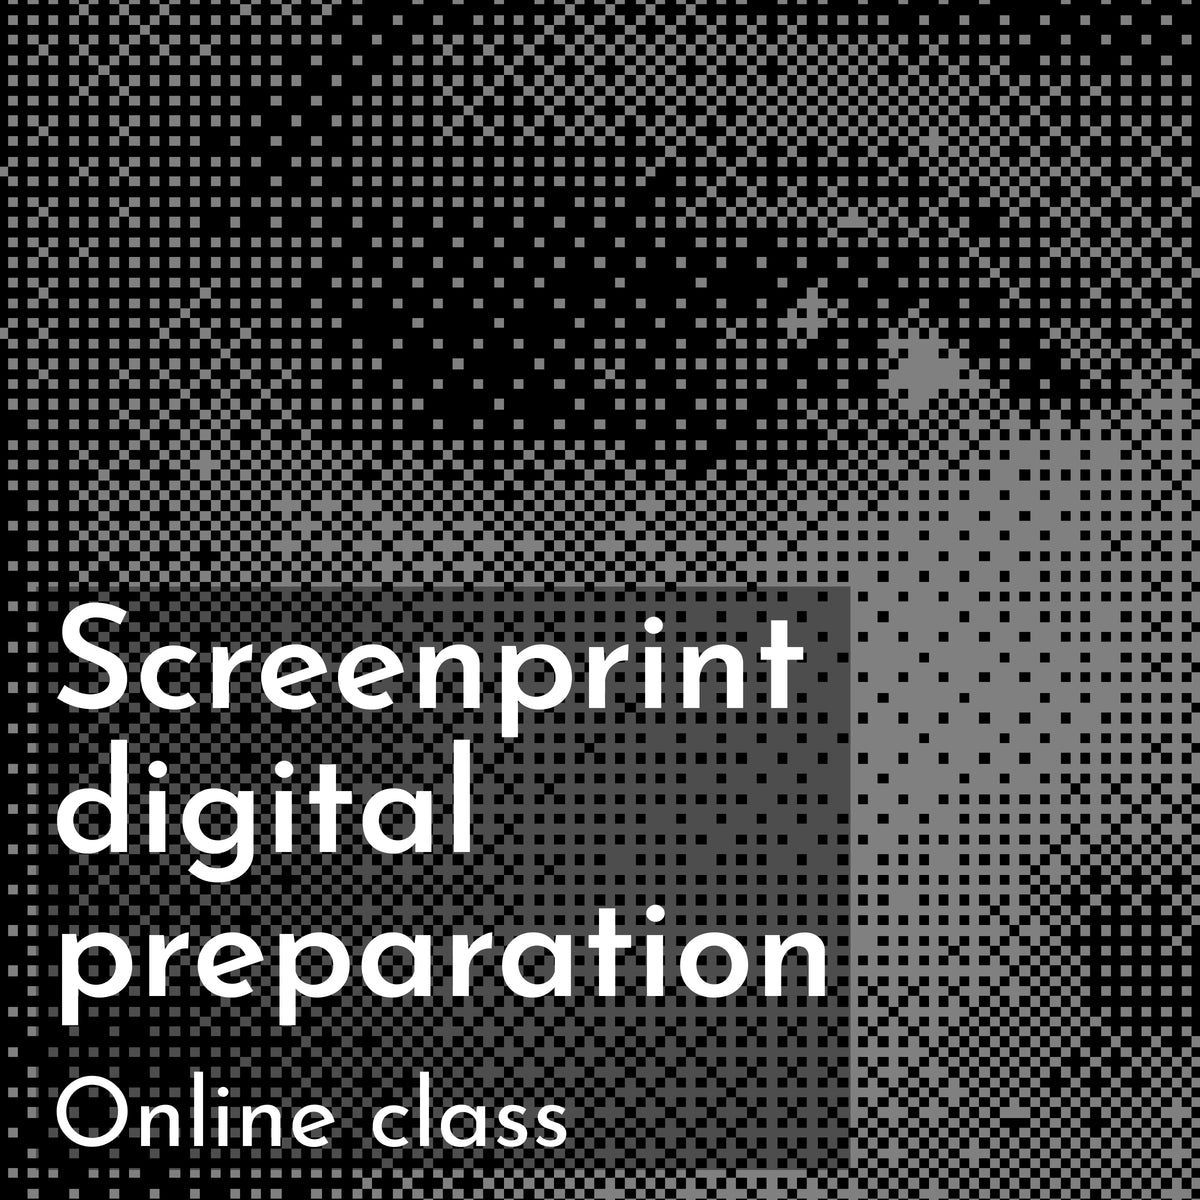 Digital Preparation for Screen Printing (online class) Taught by Justin Larkin